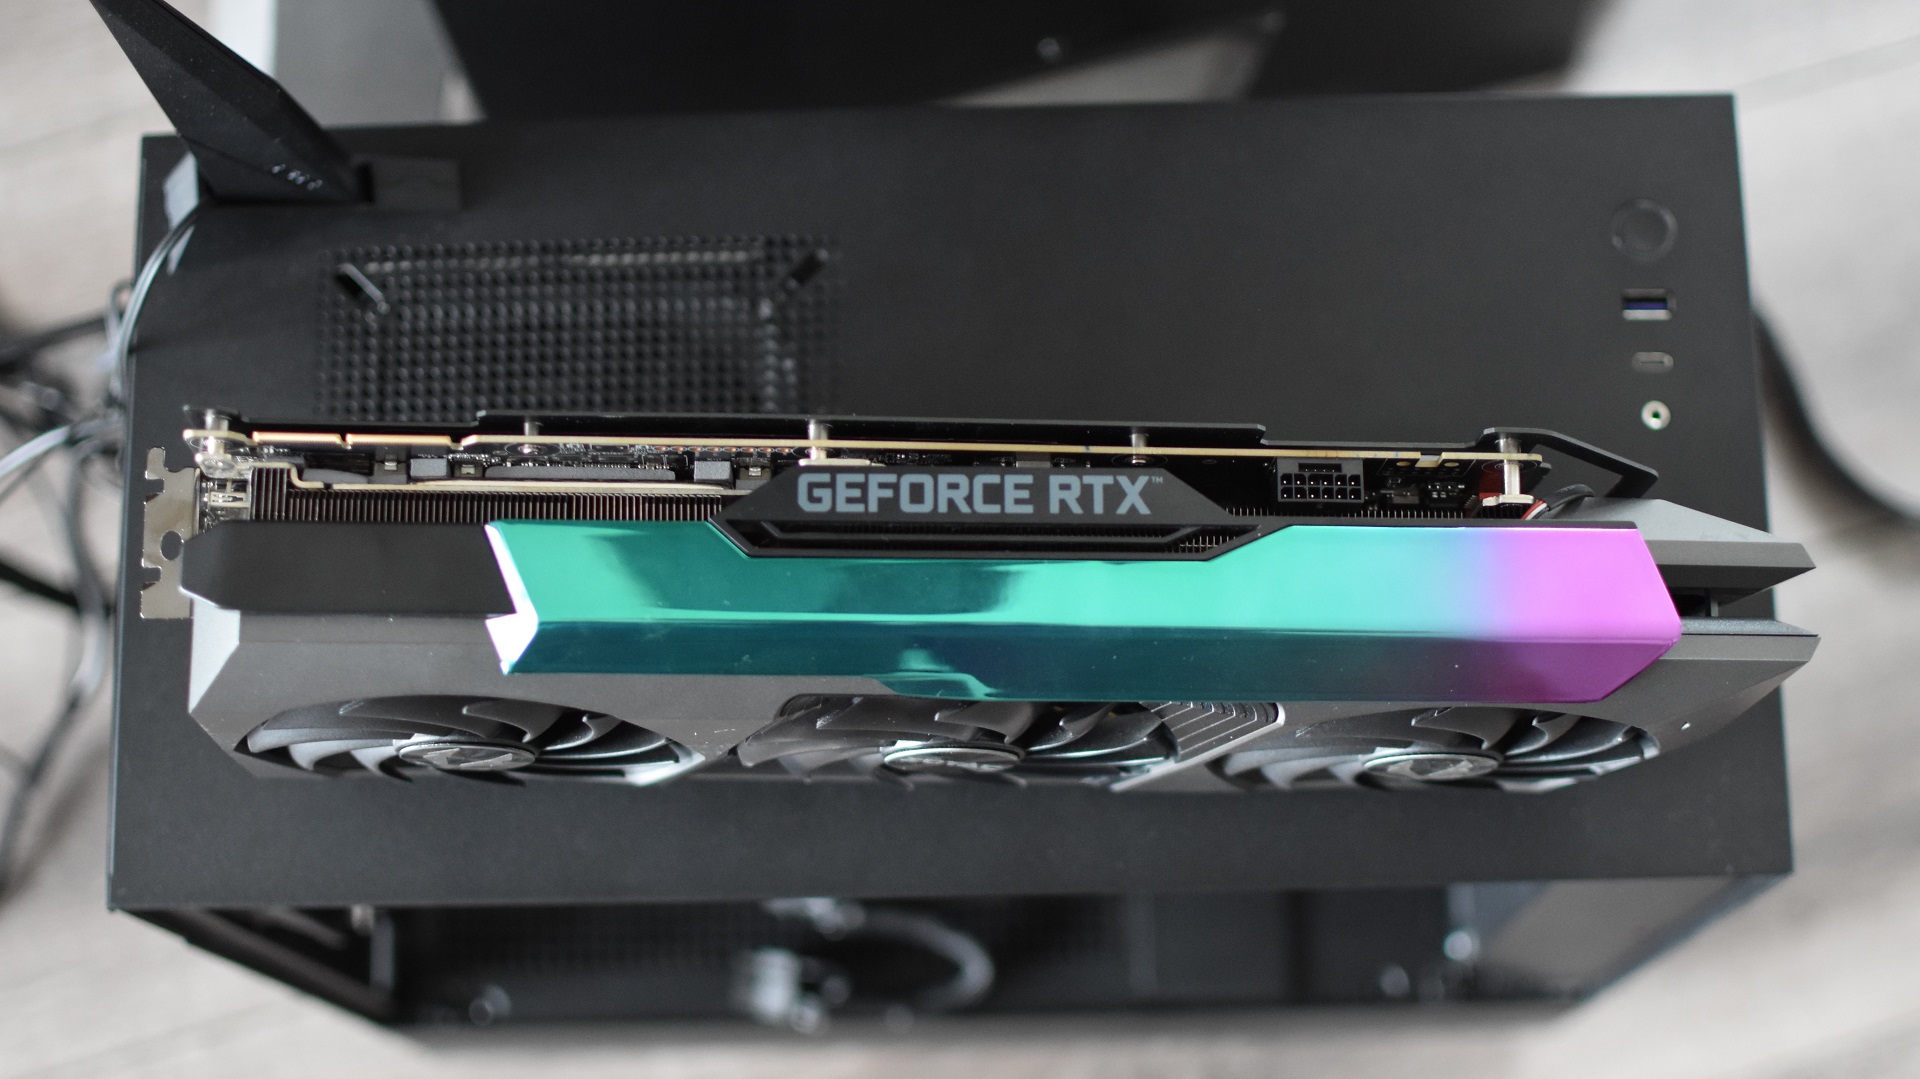 A top-down view of the Zotac GeForce RTX 3090 Ti AMP Extreme Holo graphics card as it sits sideways on top of a PC case.